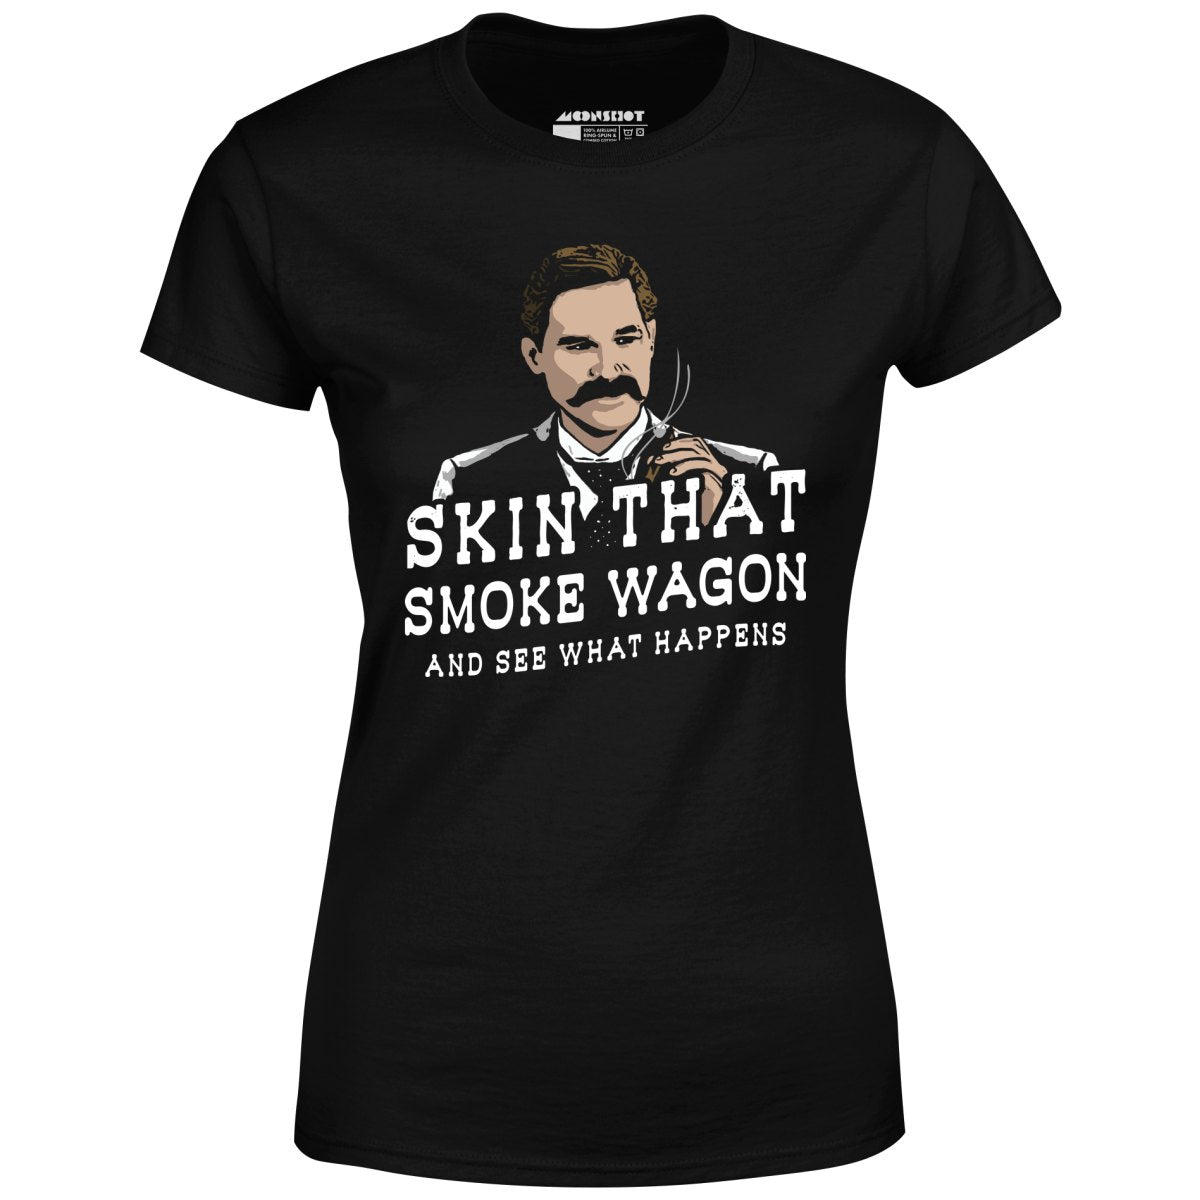 Skin That Smoke Wagon and See What Happens - Women's T-Shirt